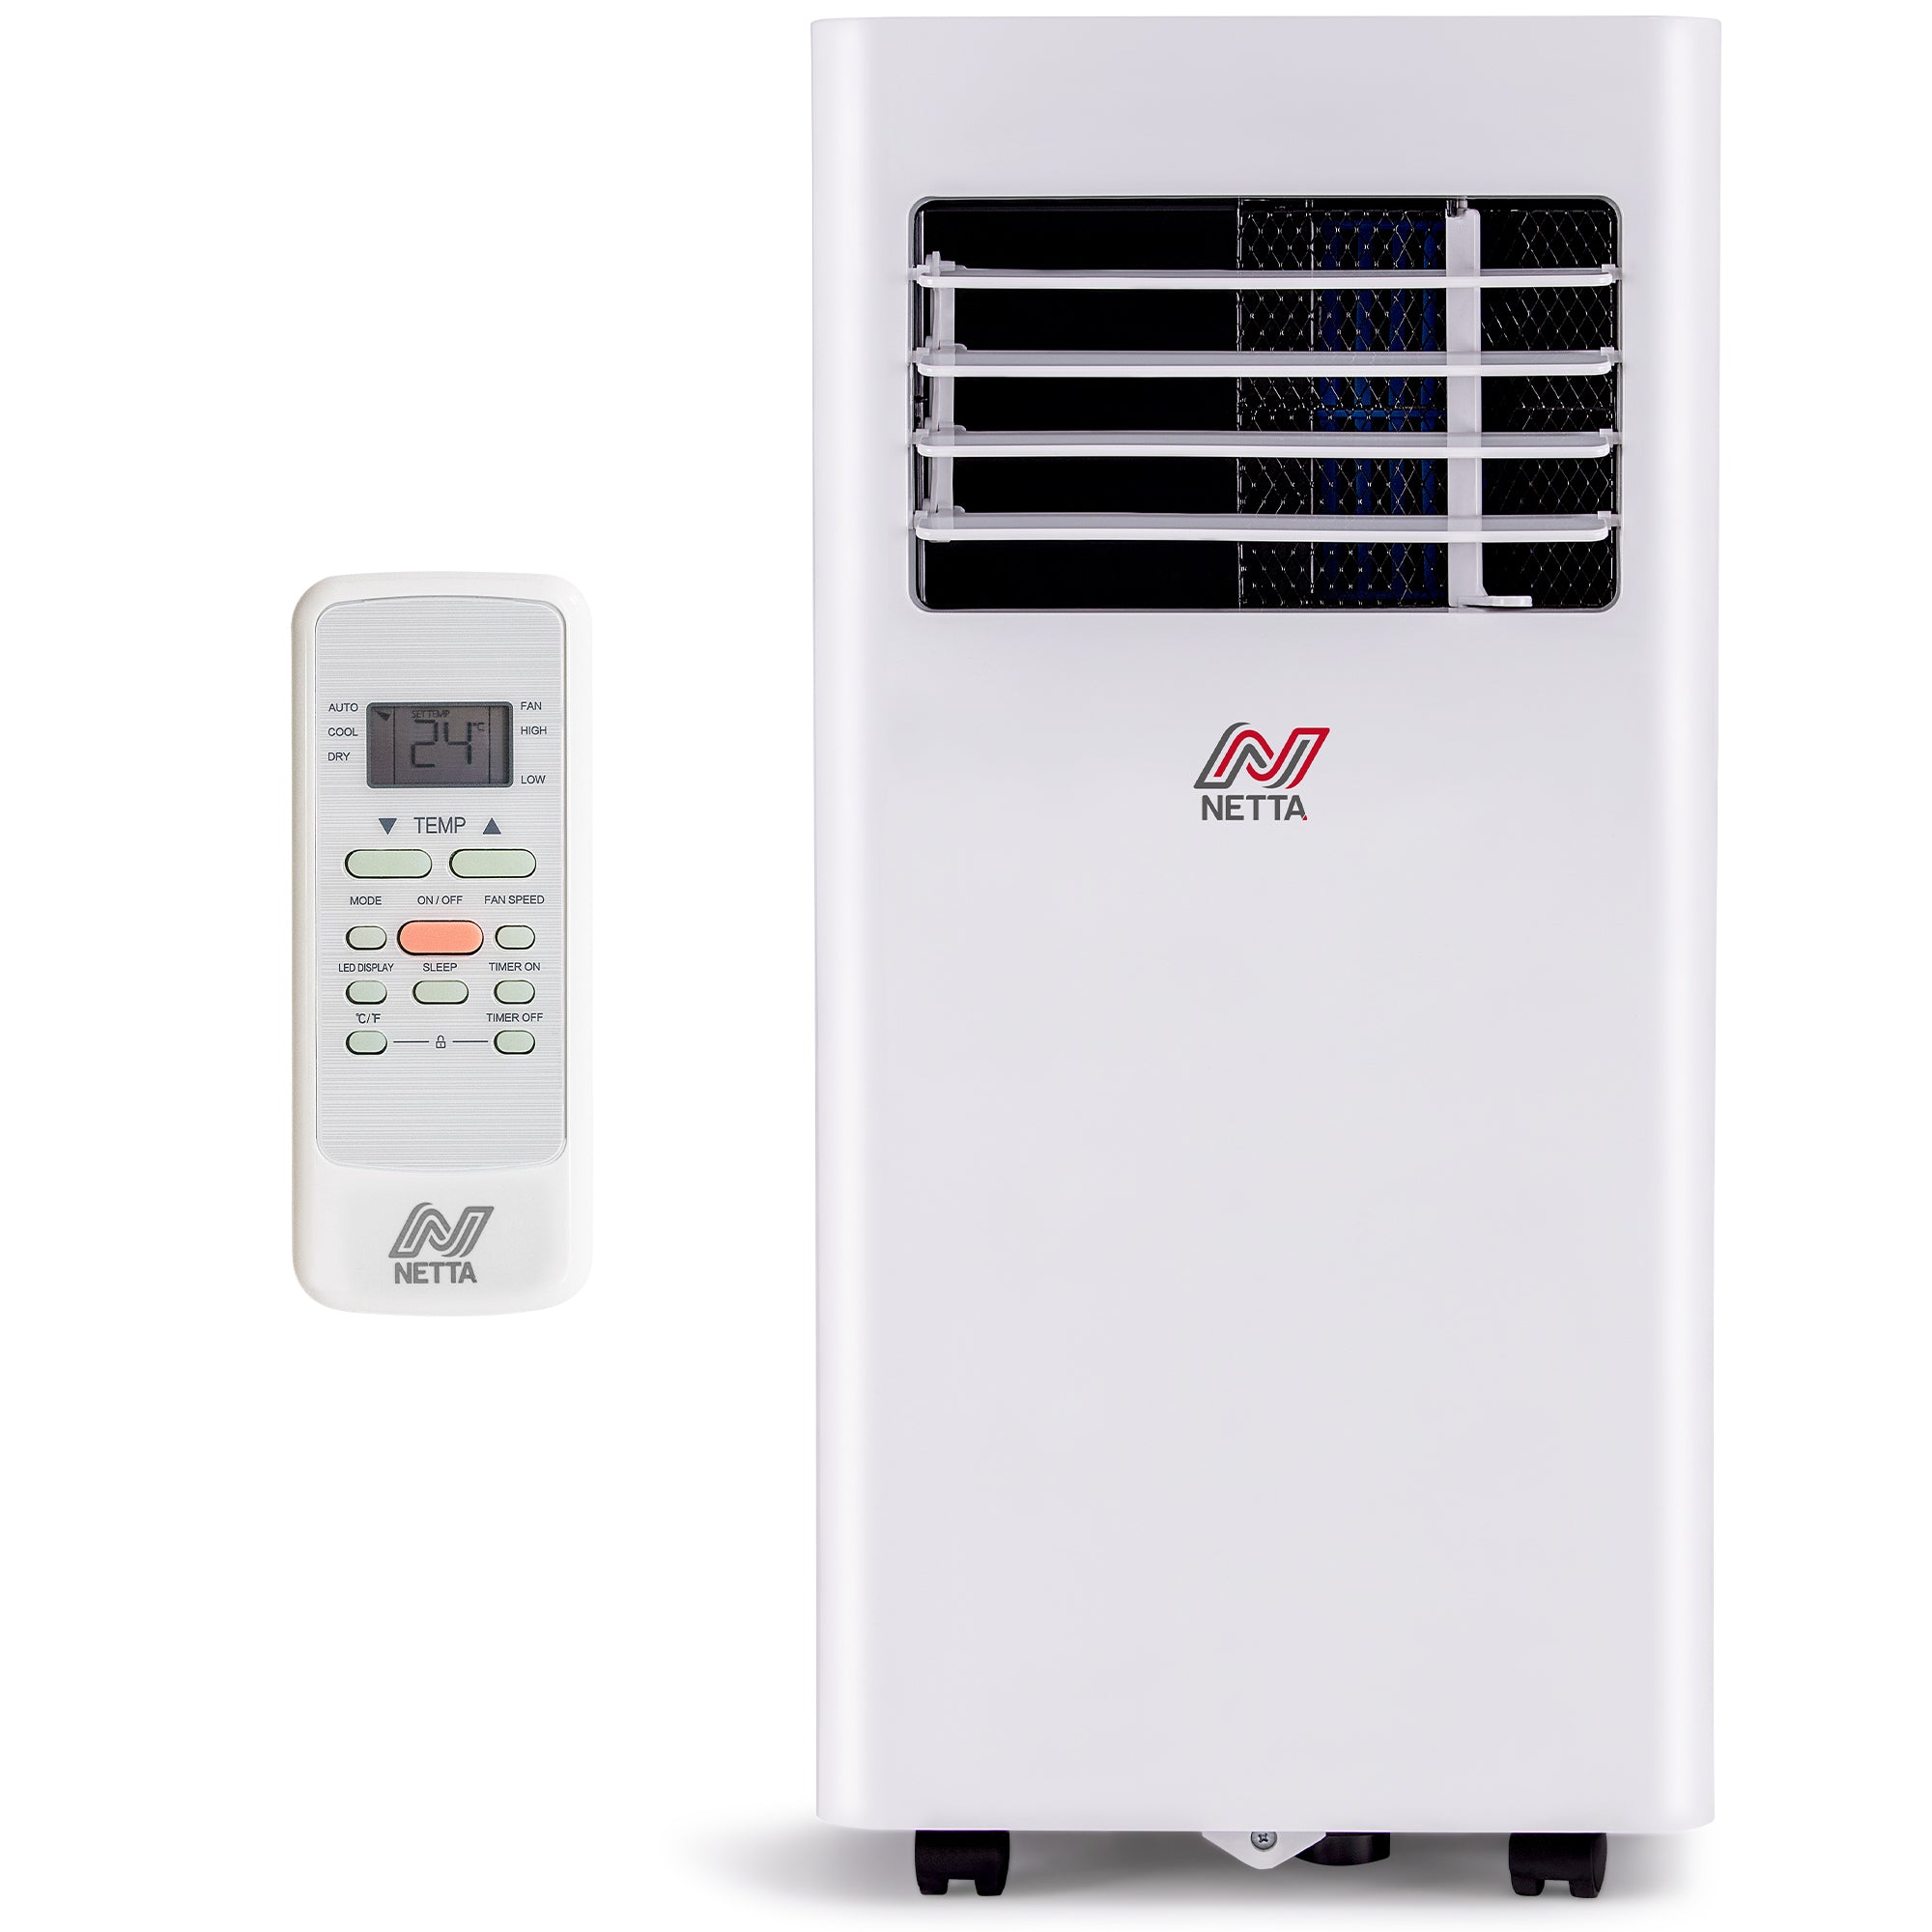 NETTA Portable Air Conditioner 8000BTU Air Con Unit for Rooms up to 20sqm